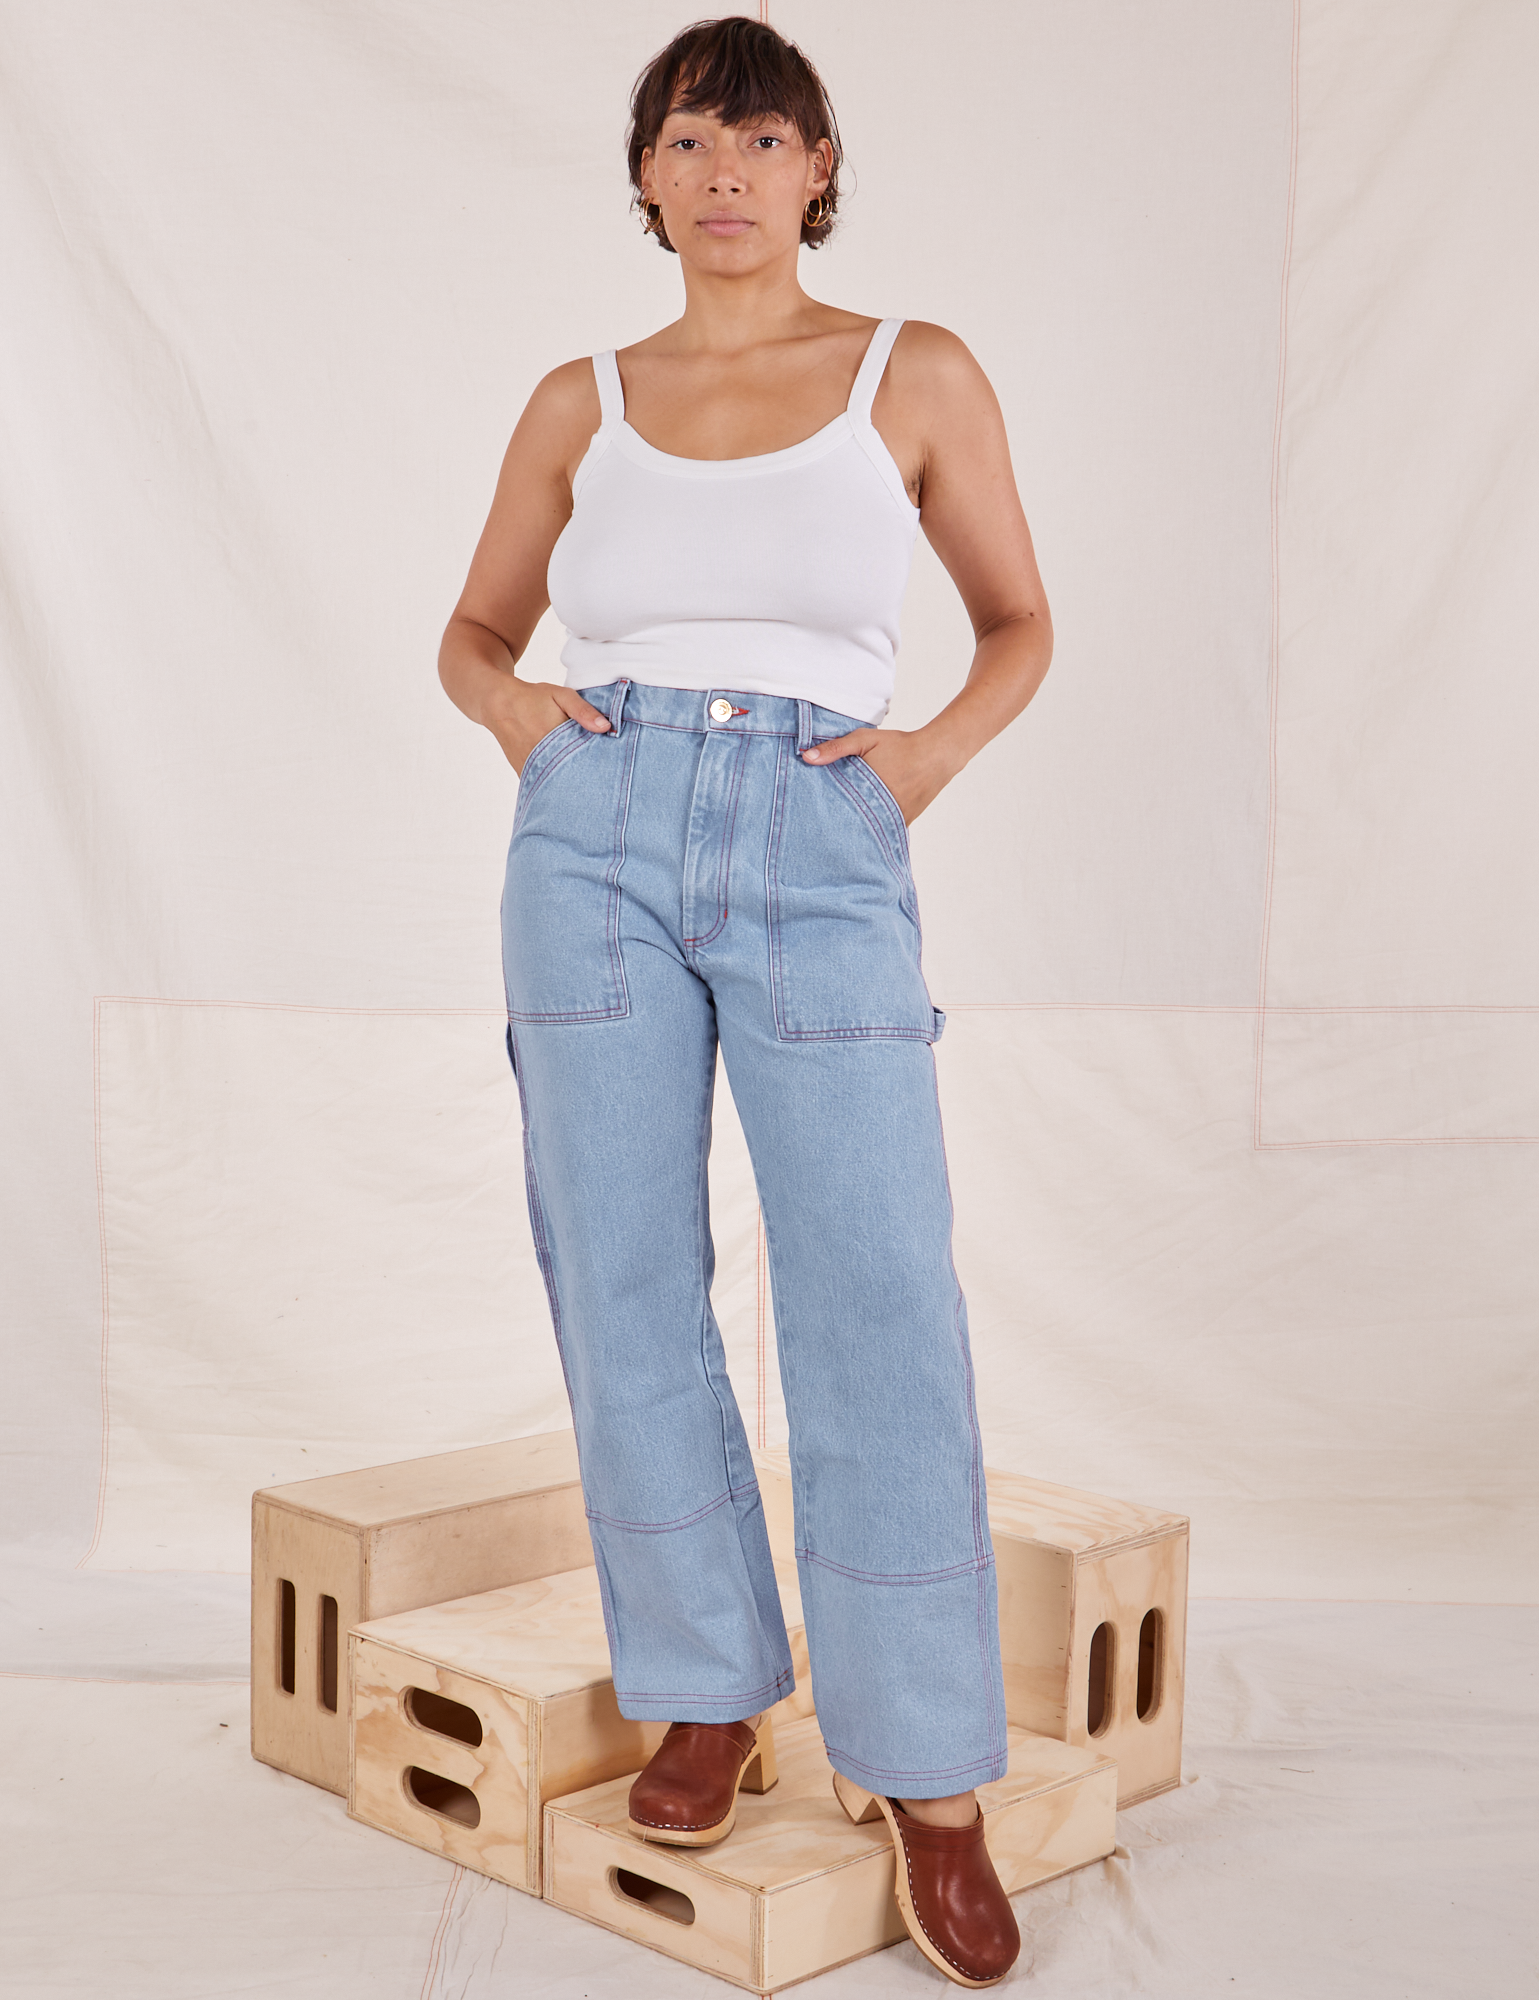 Tiara is 5'4" and wearing S Carpenter Jeans in Light Wash paired with vintage off-white Cami